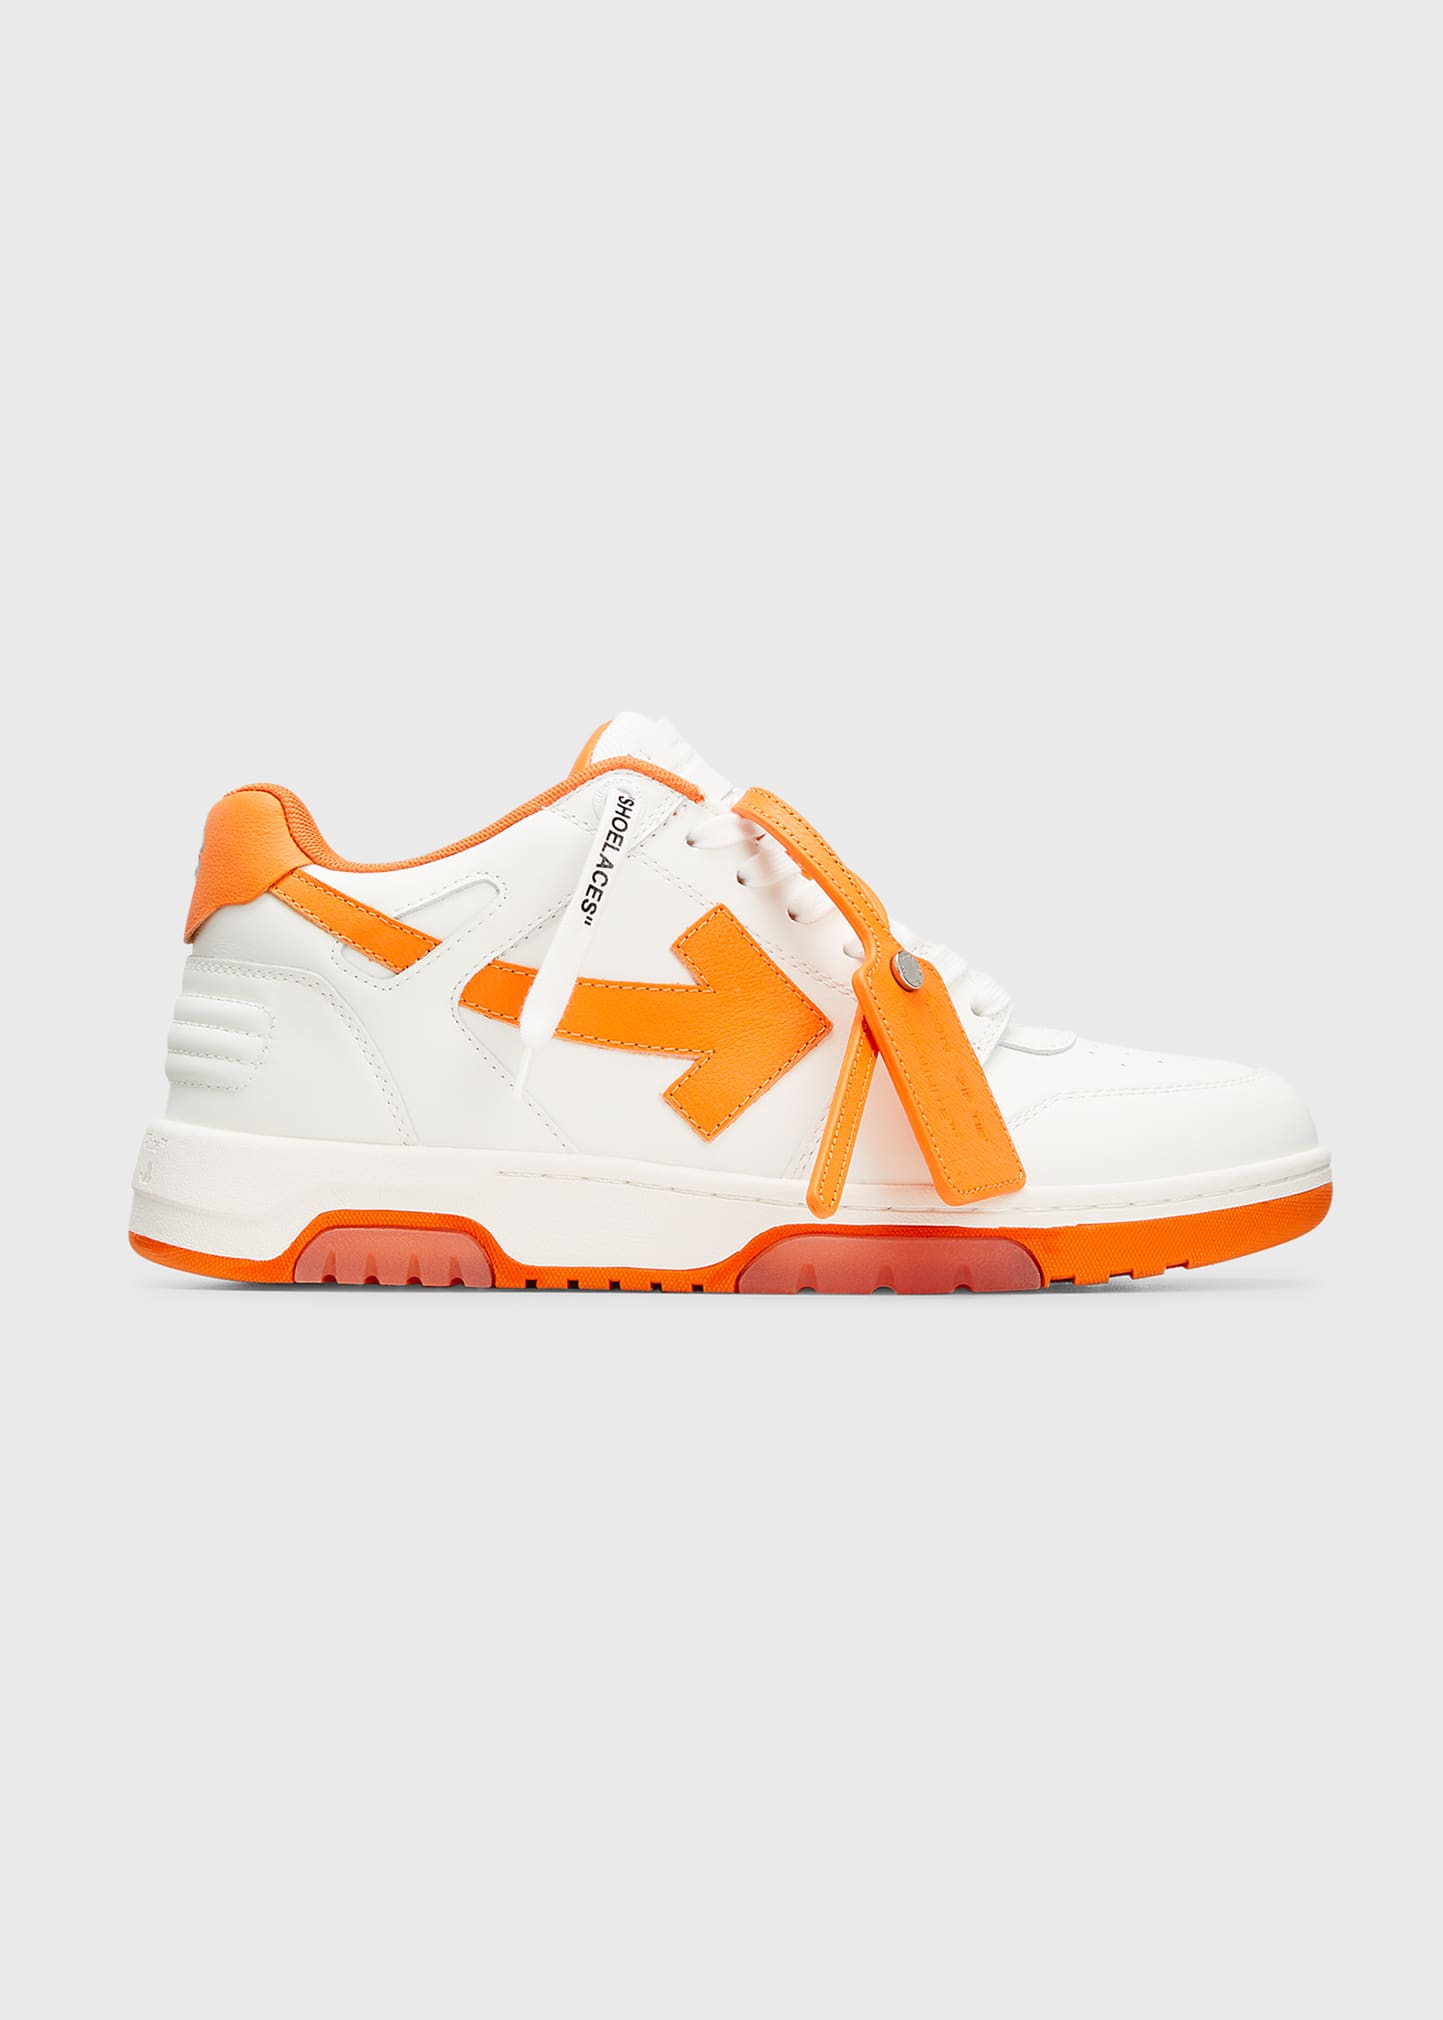 OFF-WHITE MEN'S EXCLUSIVE OUT OF OFFICE LEATHER SNEAKERS